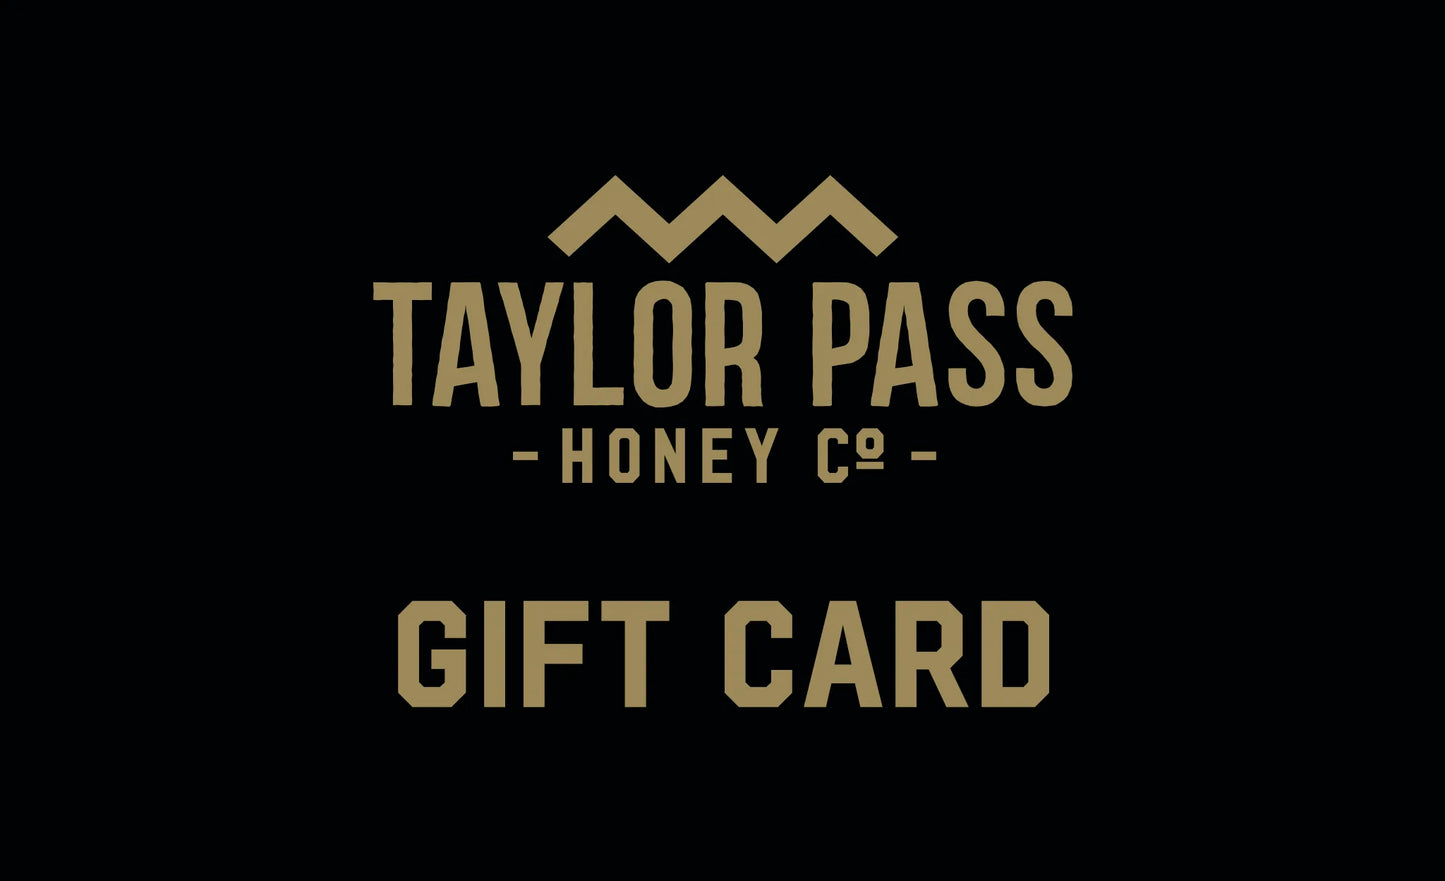 Taylor Pass Honey Co Gift Card